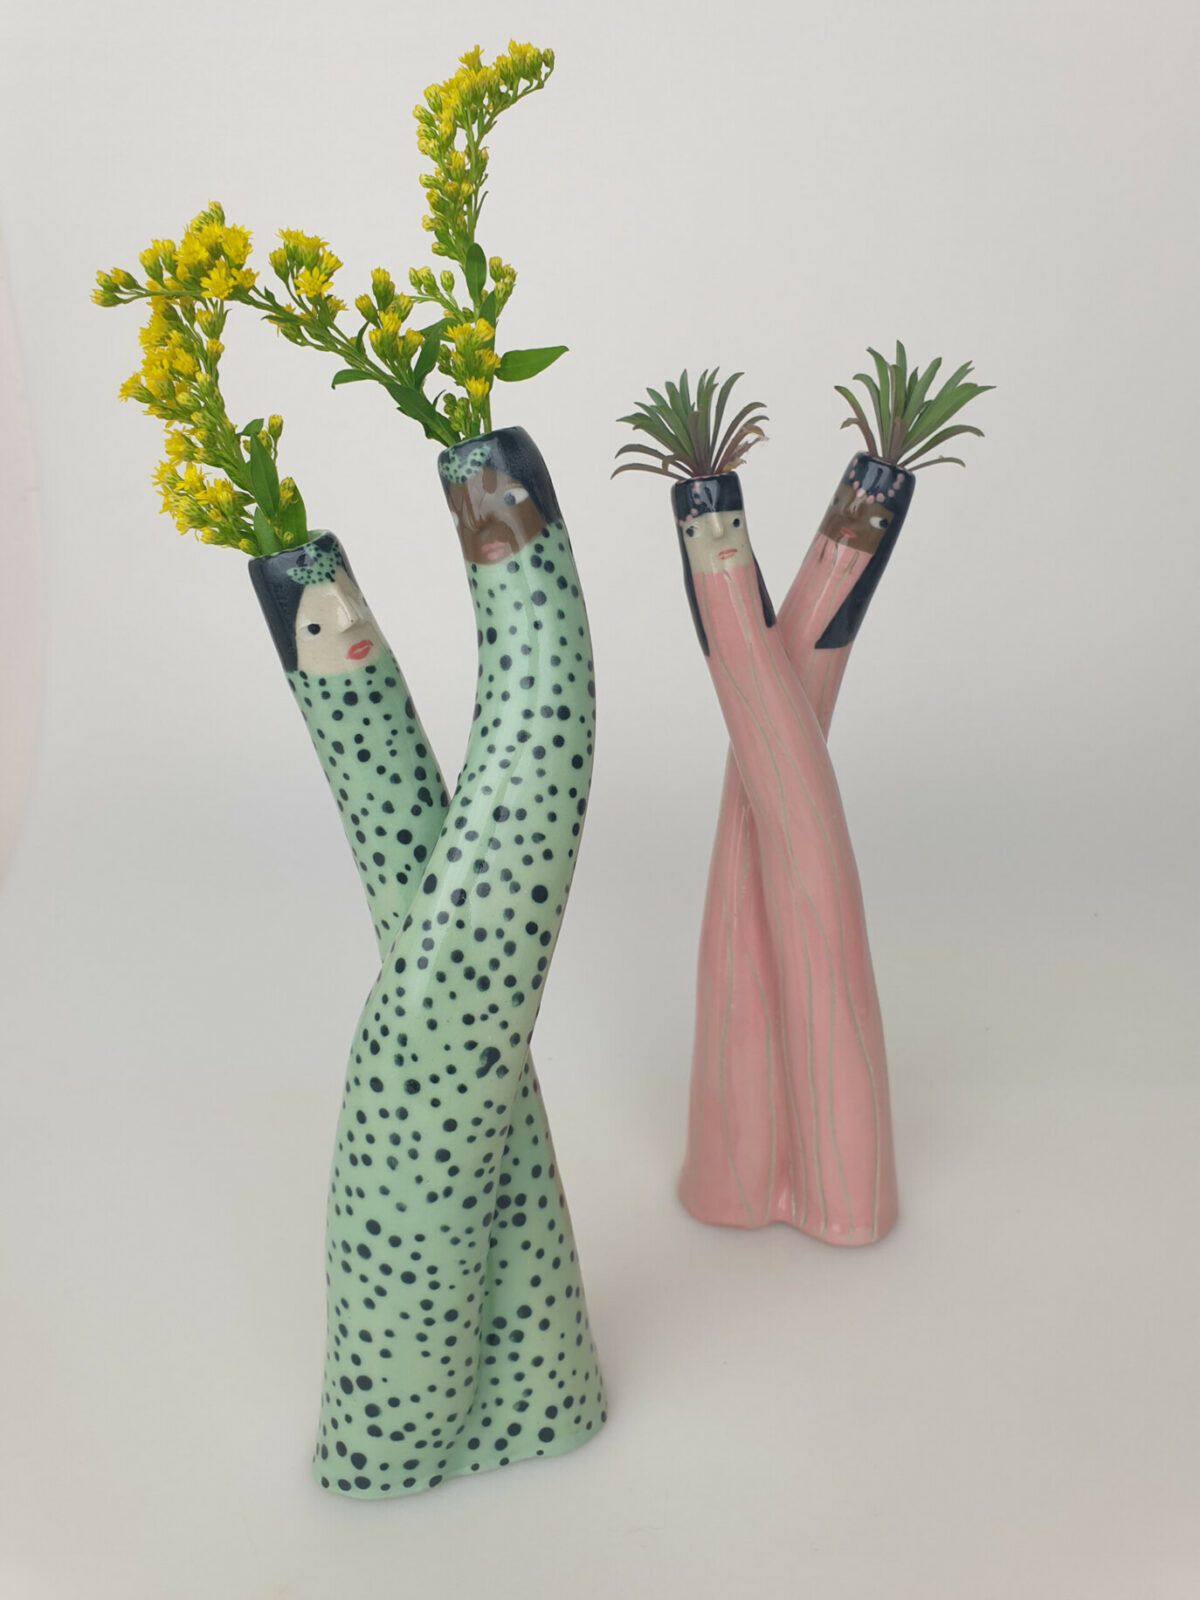 Lovely Porcelain Pieces Patterned With Quirky Cartoon Like Figures By Sandra Apperloo 3